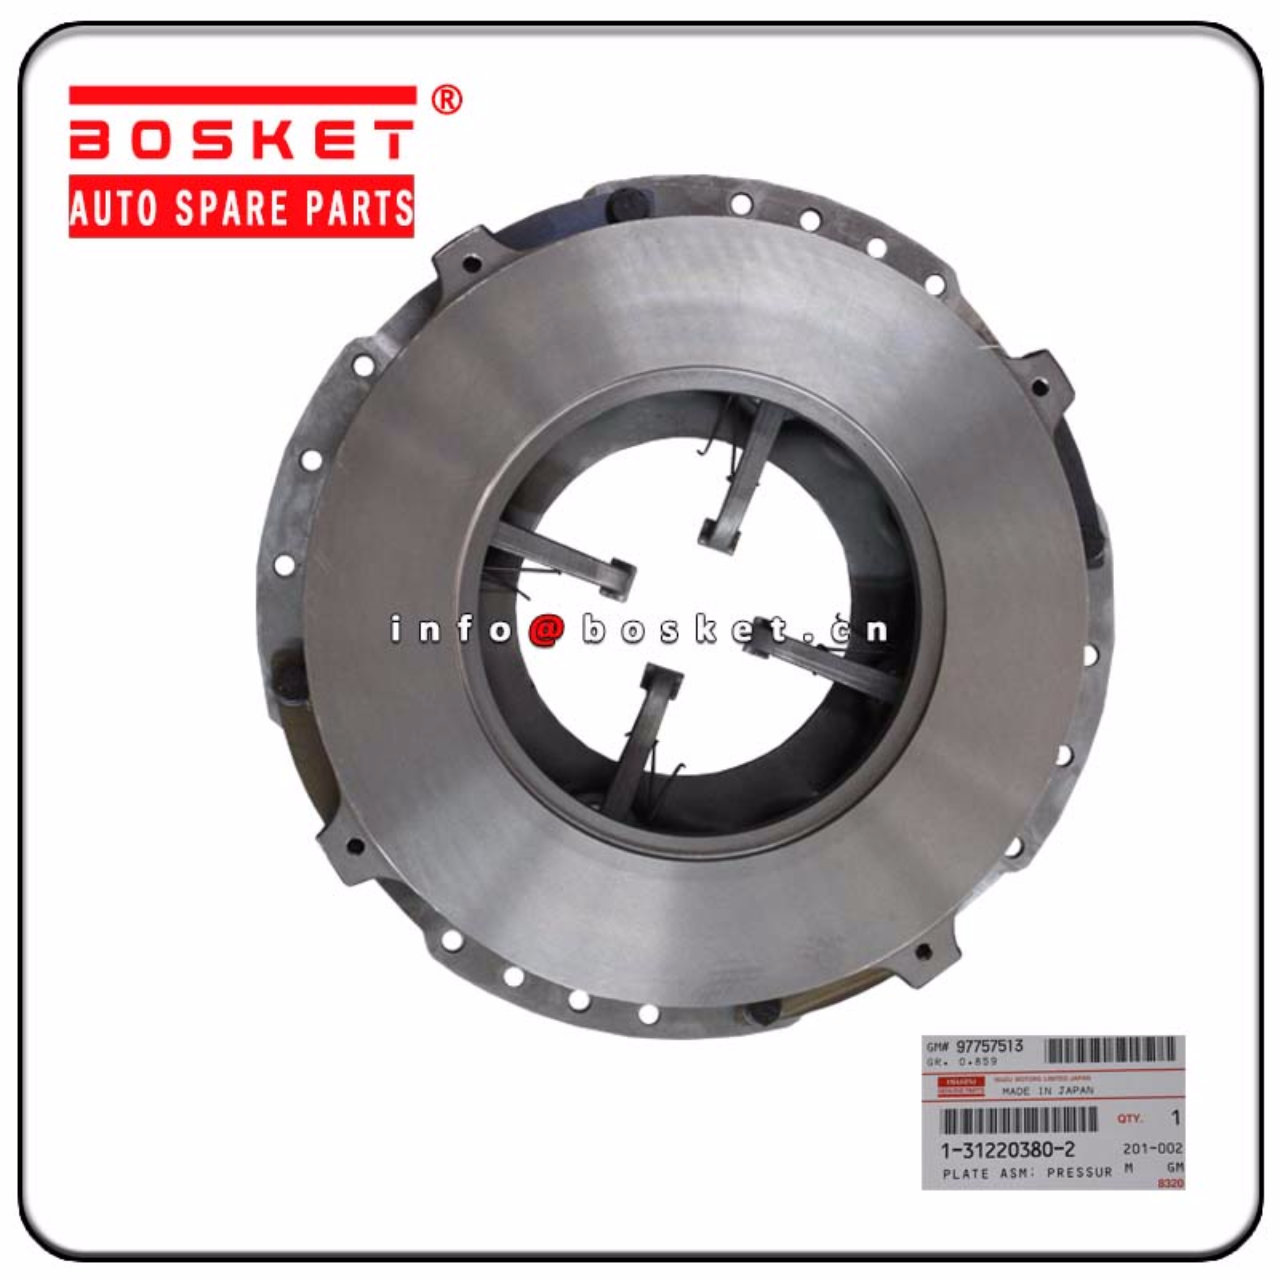 1-31220380-2 1-87610145-0 1312203802 1876101450 Clutch Pressure Plate Assembly Suitable for ISUZU 6S